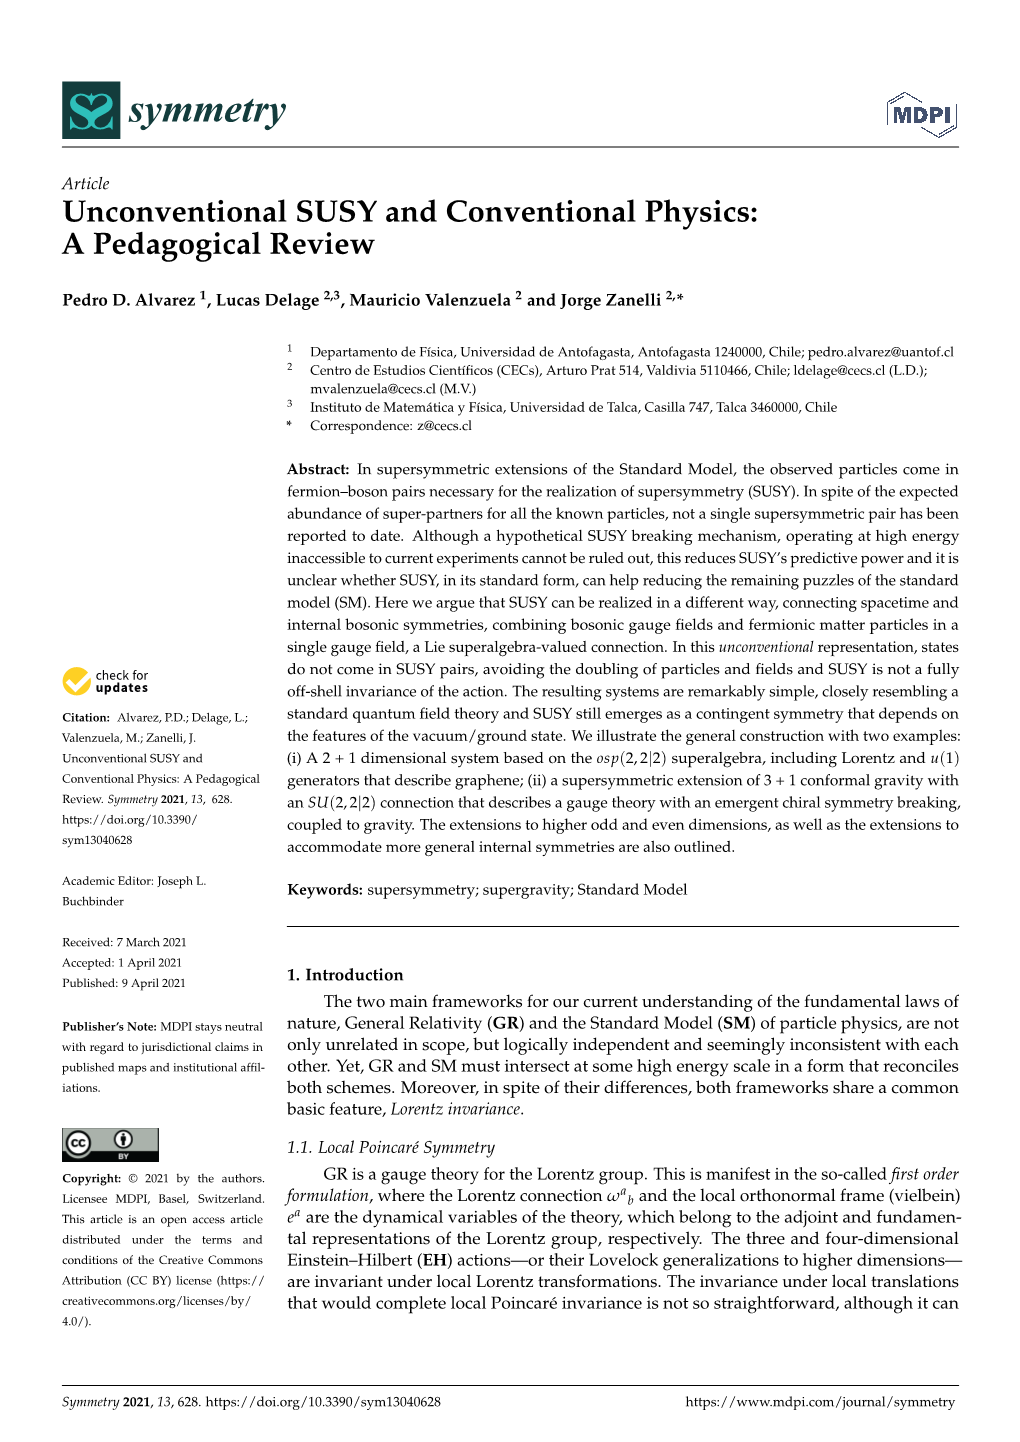 Unconventional SUSY and Conventional Physics: a Pedagogical Review